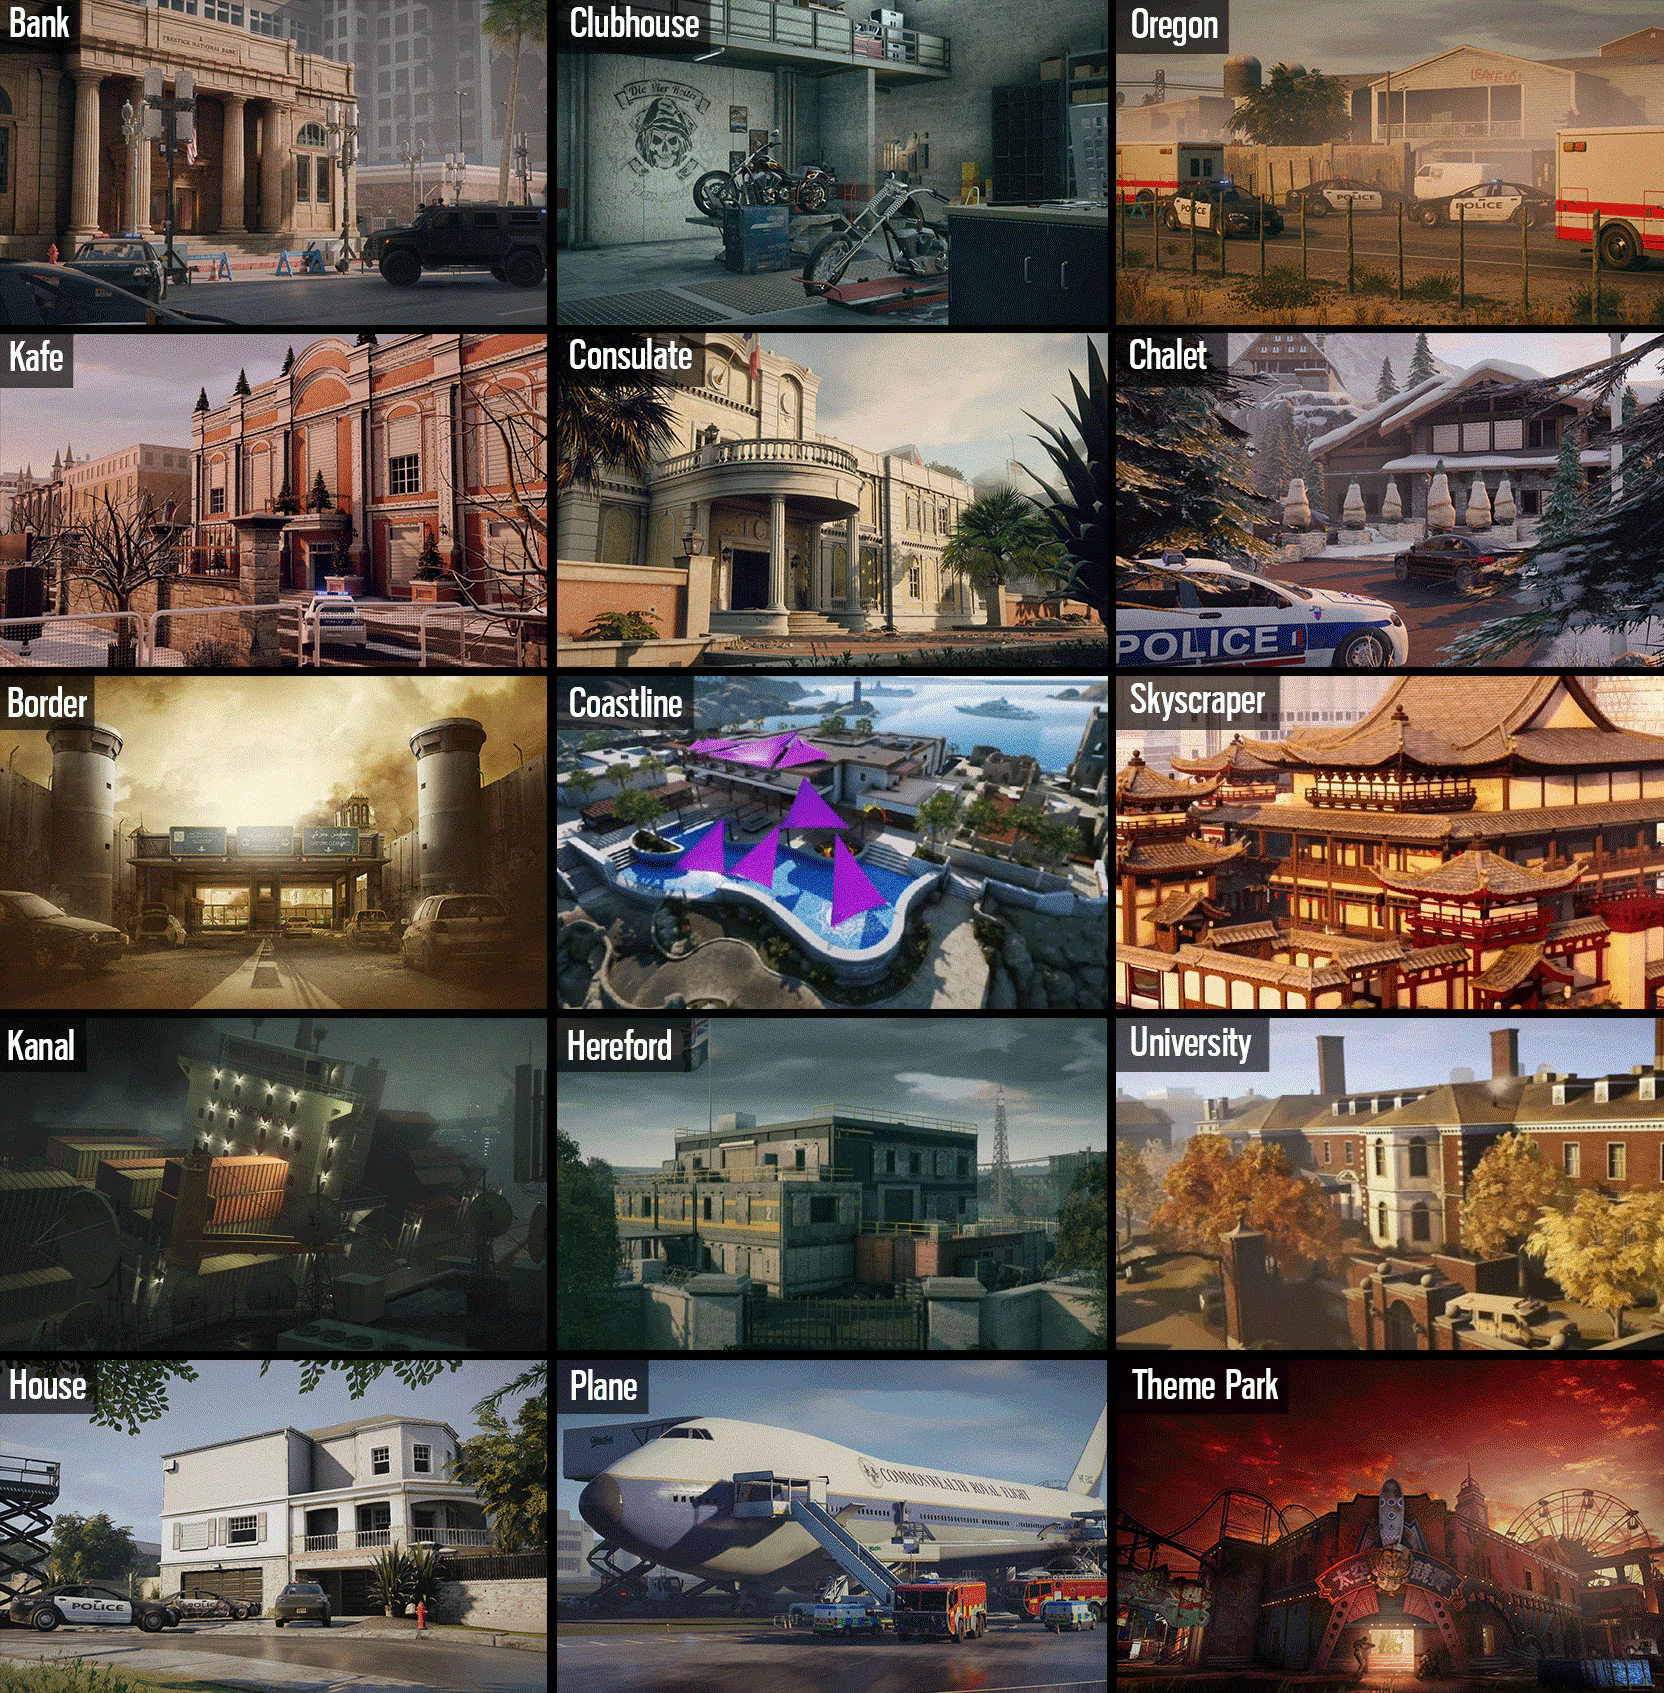 THESE MAPS WERE REMOVED FROM THE GAME!